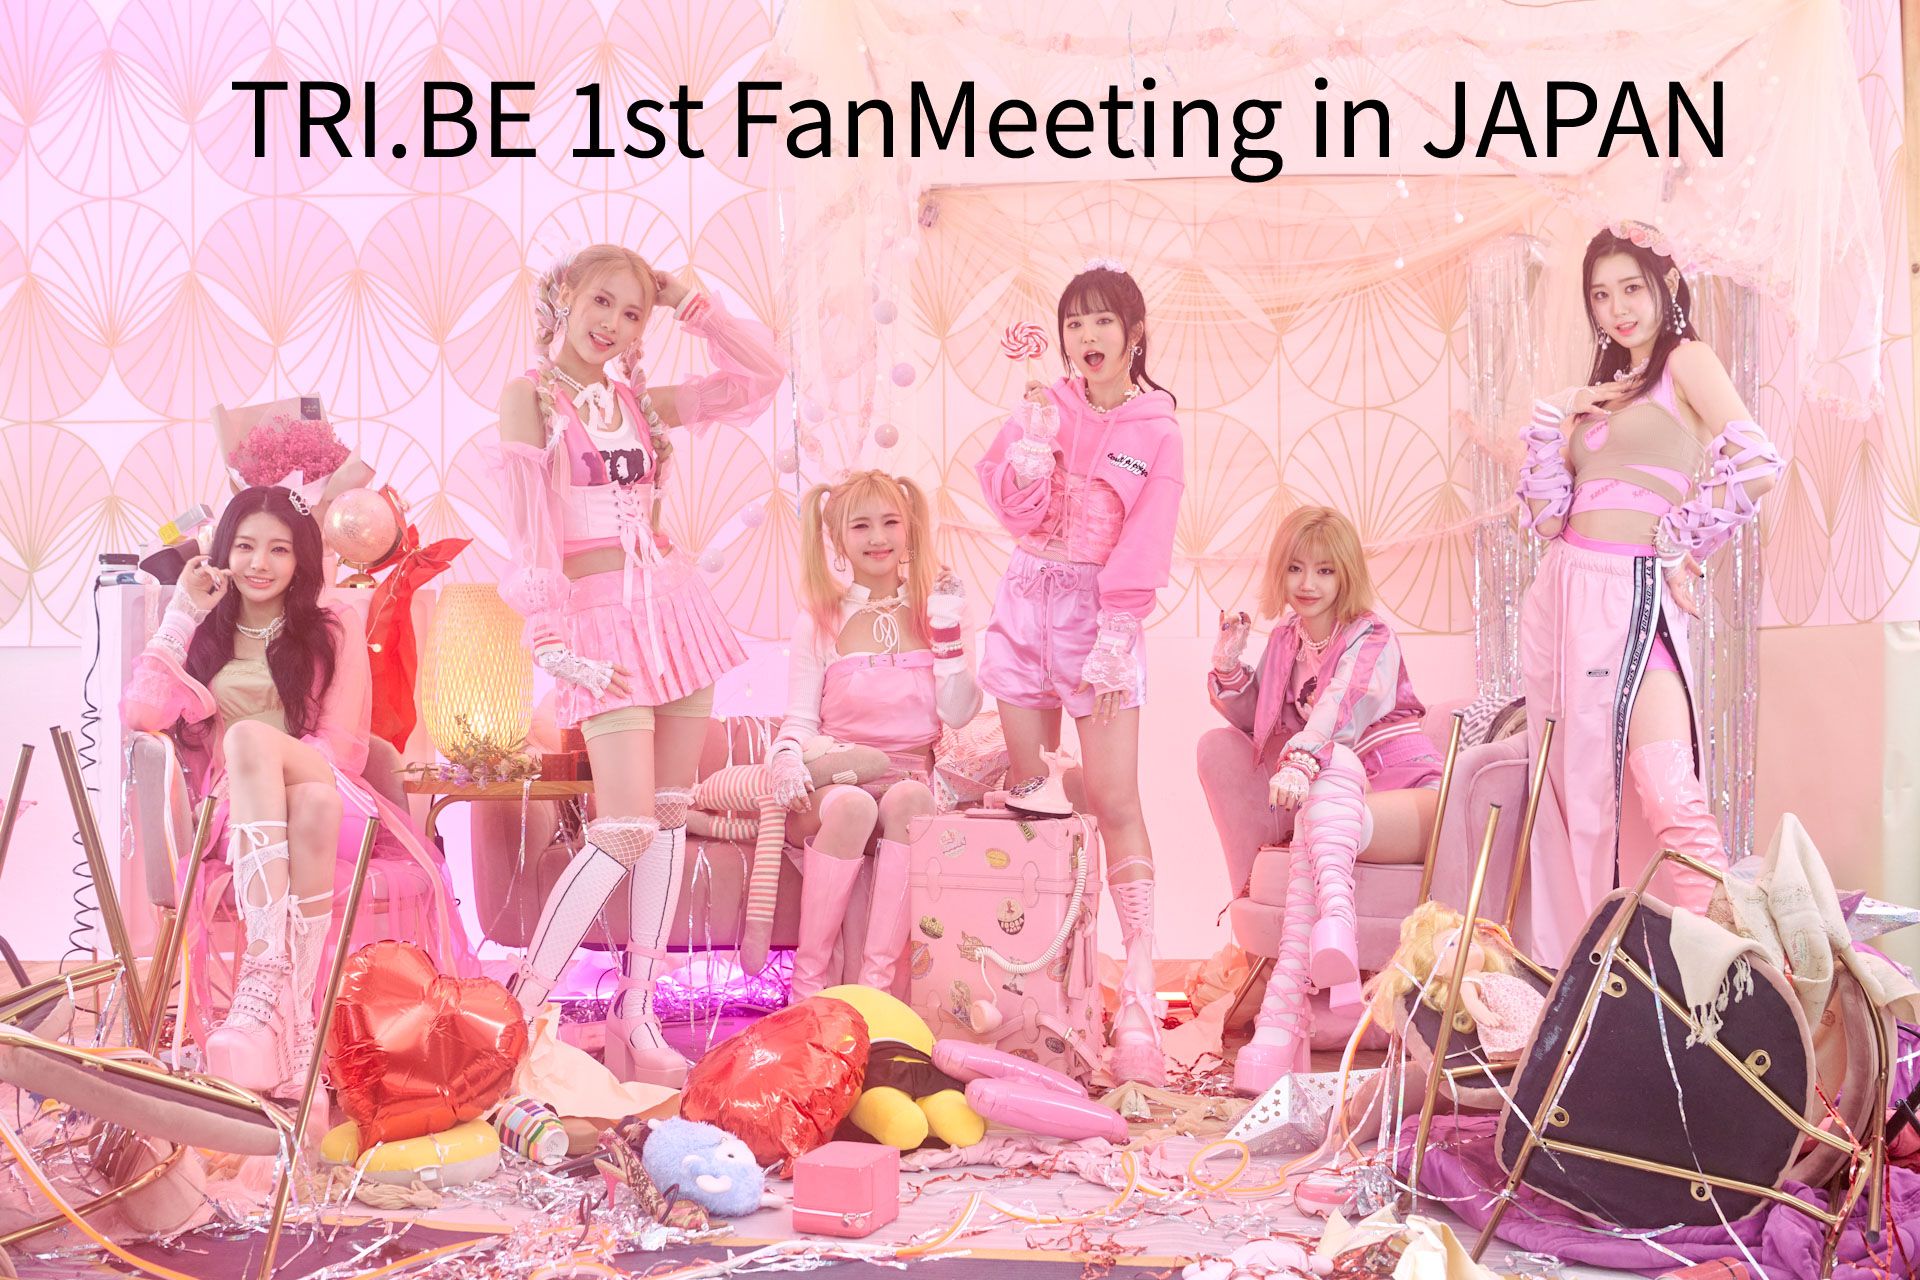 TRI.BE 1st FanMeeting in JAPAN